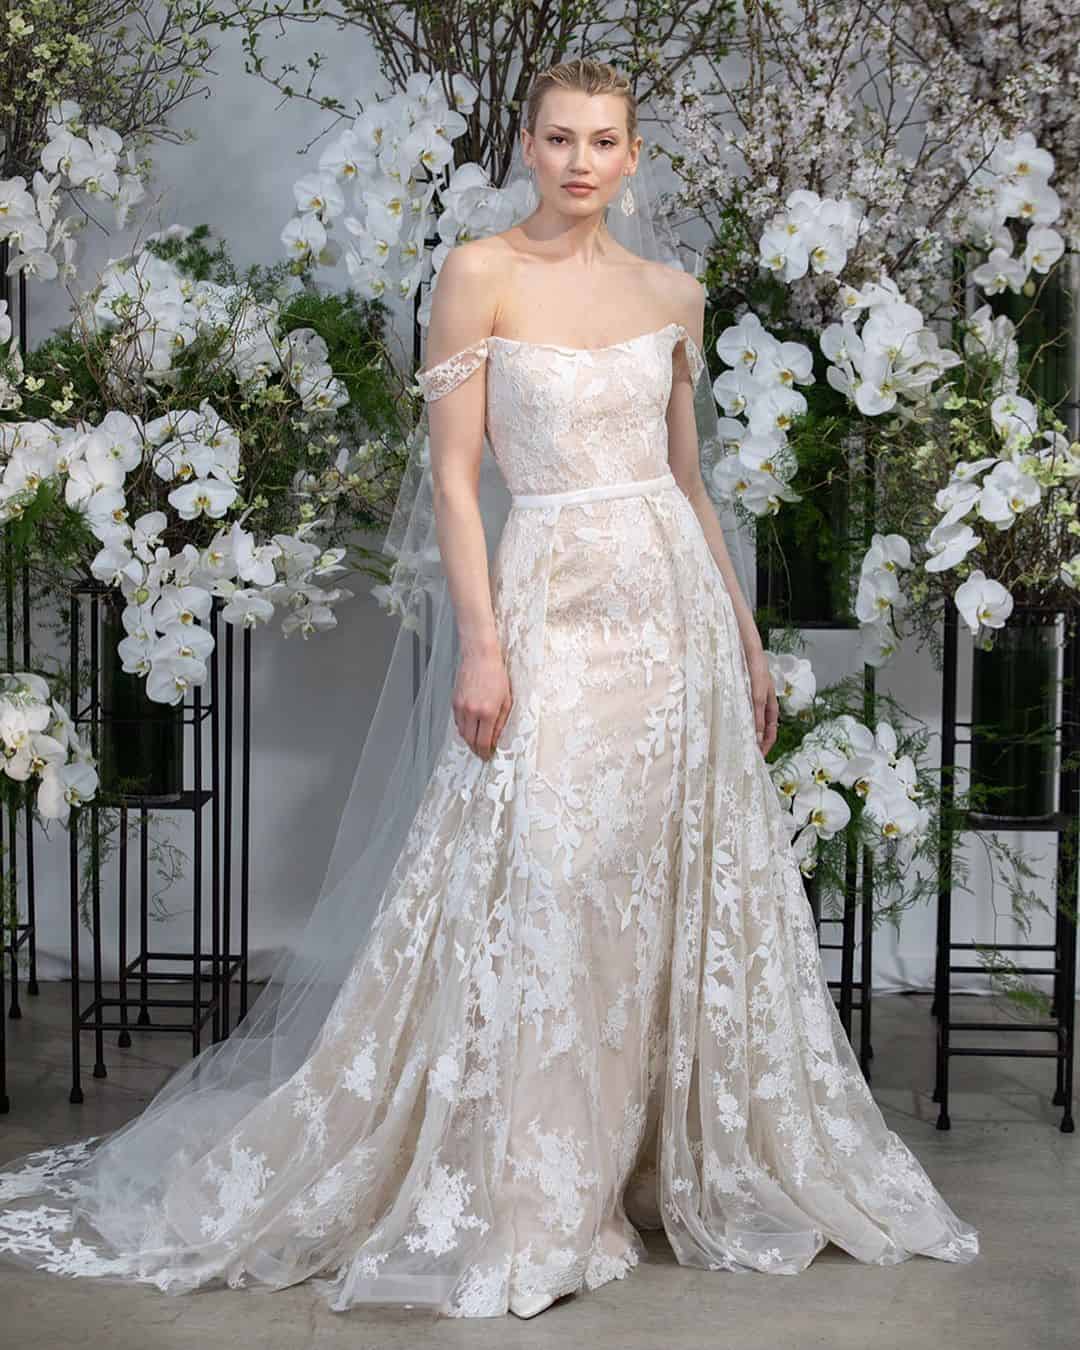 Traditional Meets Contemporary In Anne Barge’s Bridal Designs